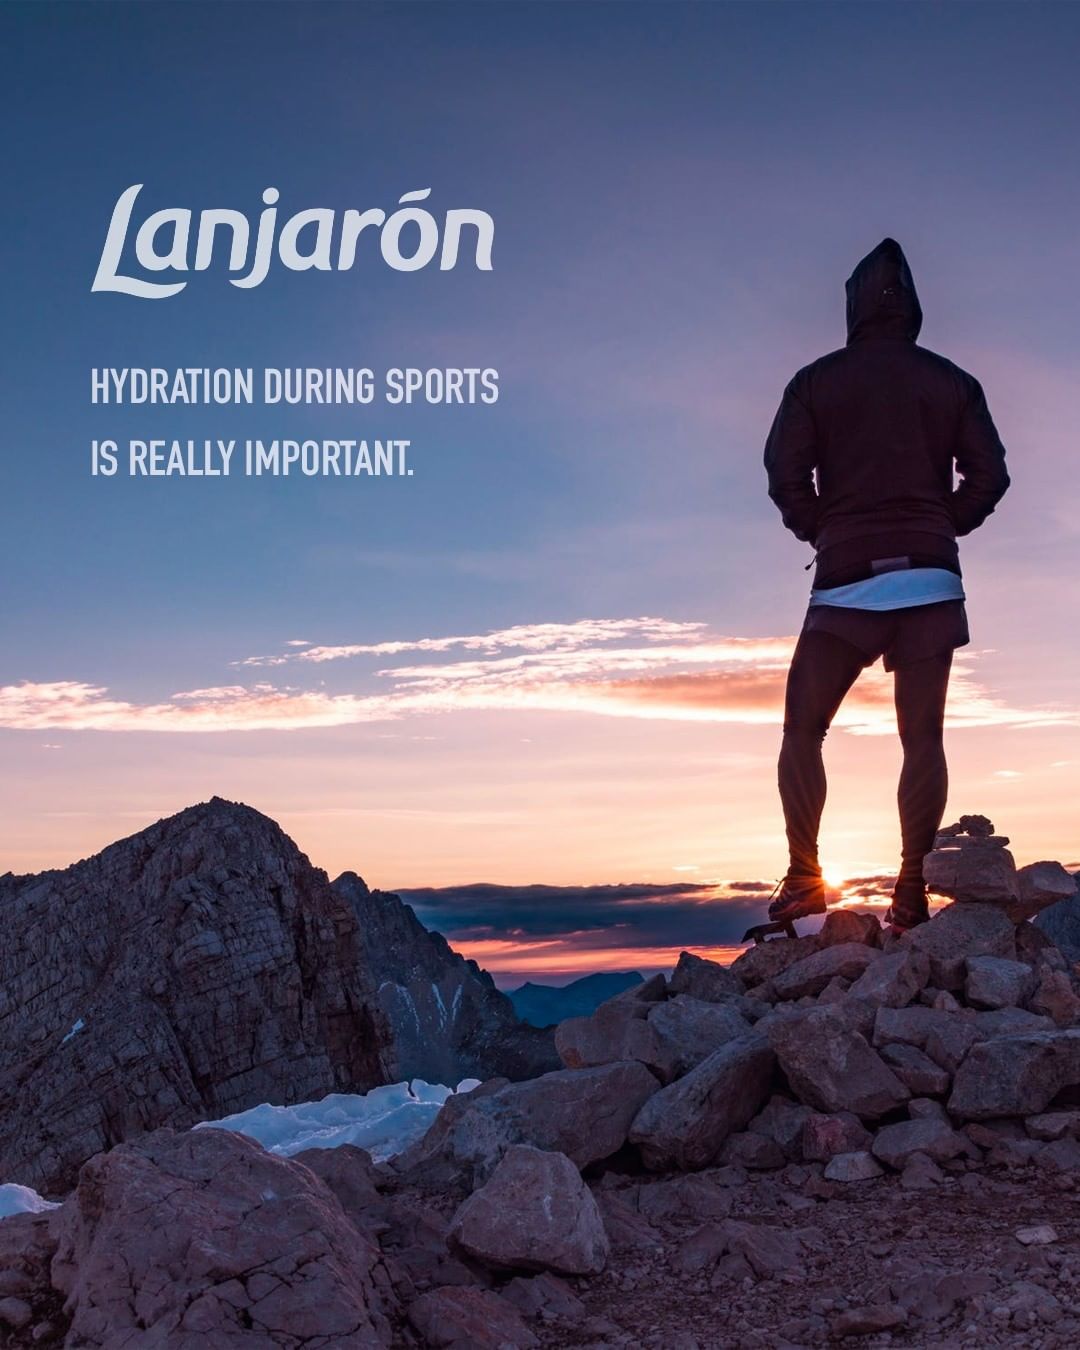 If you don’t hydrate while exercising, your performance will decline and you will feel discomfort. The symptoms of dehydration can be felt when the amount of water you lose is equal to one percent of your body weight.